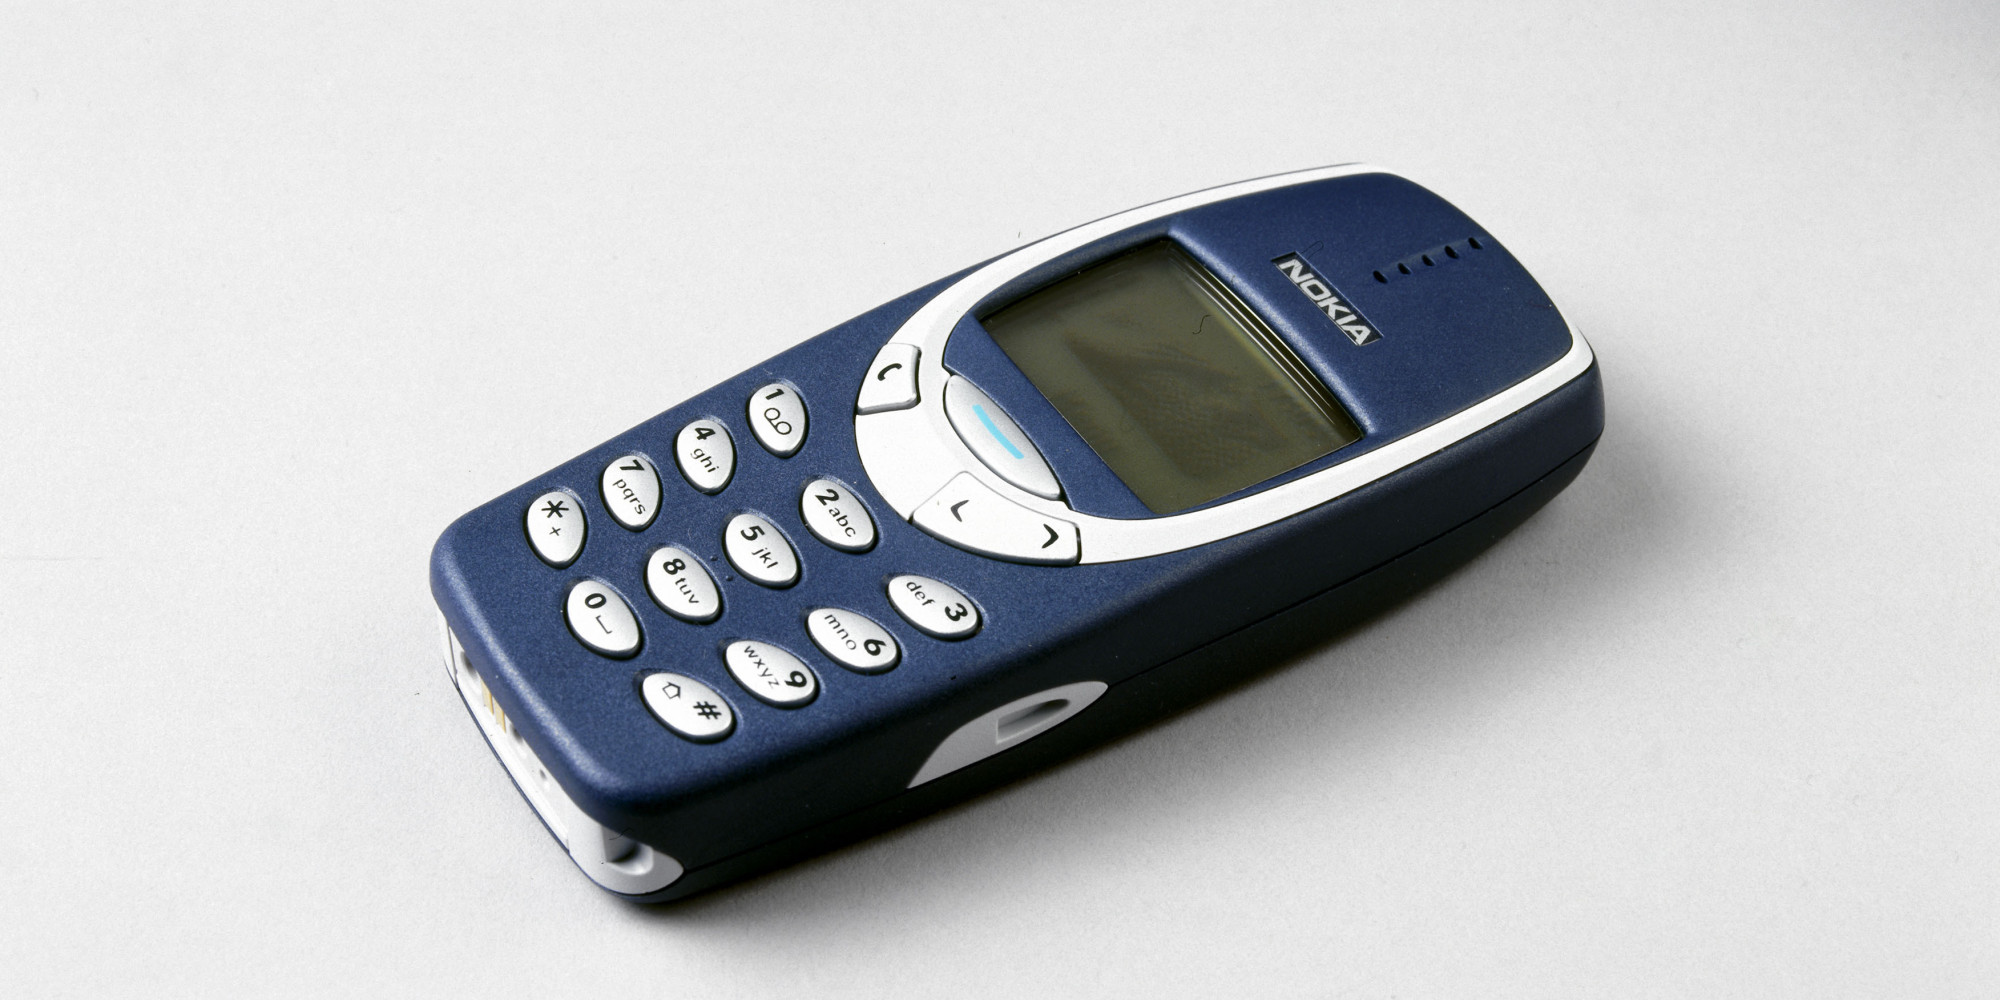 Why do we get all nostalgic over old tech like the Nokia 3310?